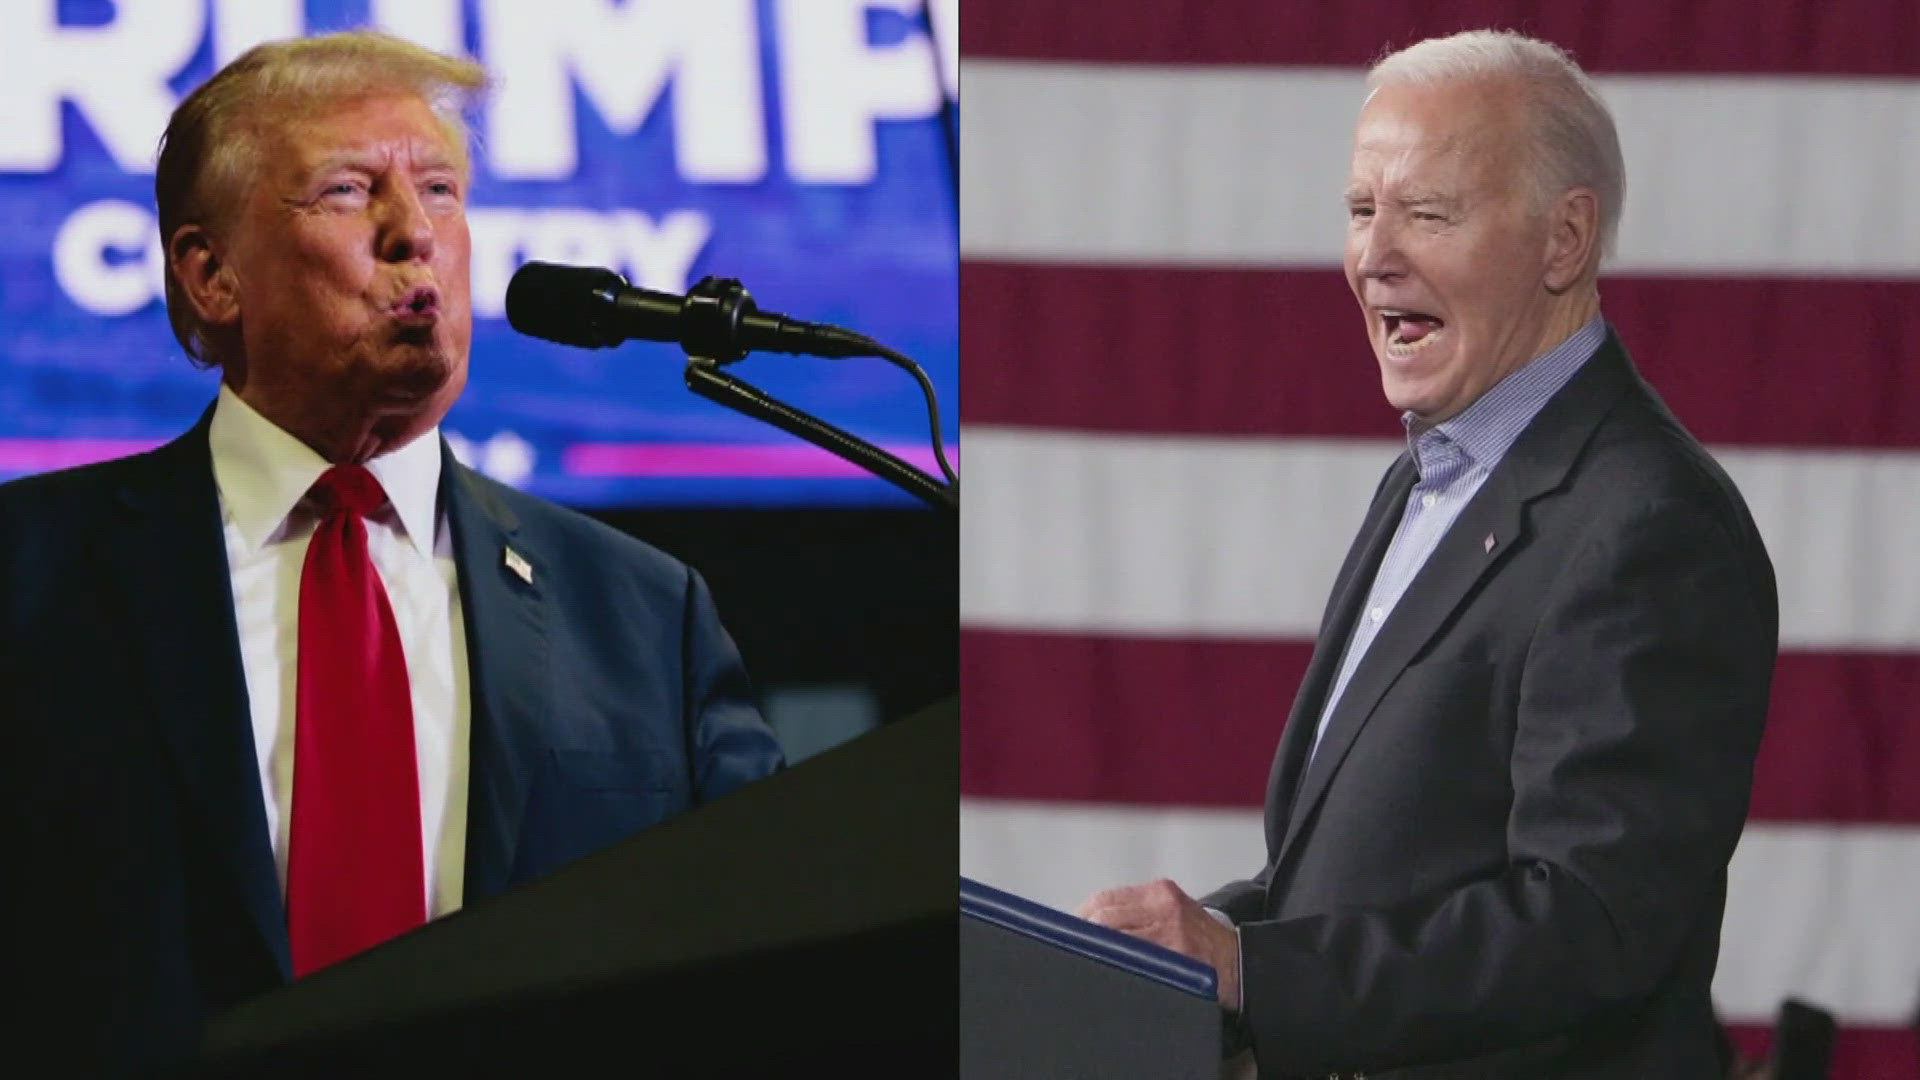 Mr. Trump is out on the campaign trail while Biden is spending time at Camp David preparing for debate with team of current and former advisors.